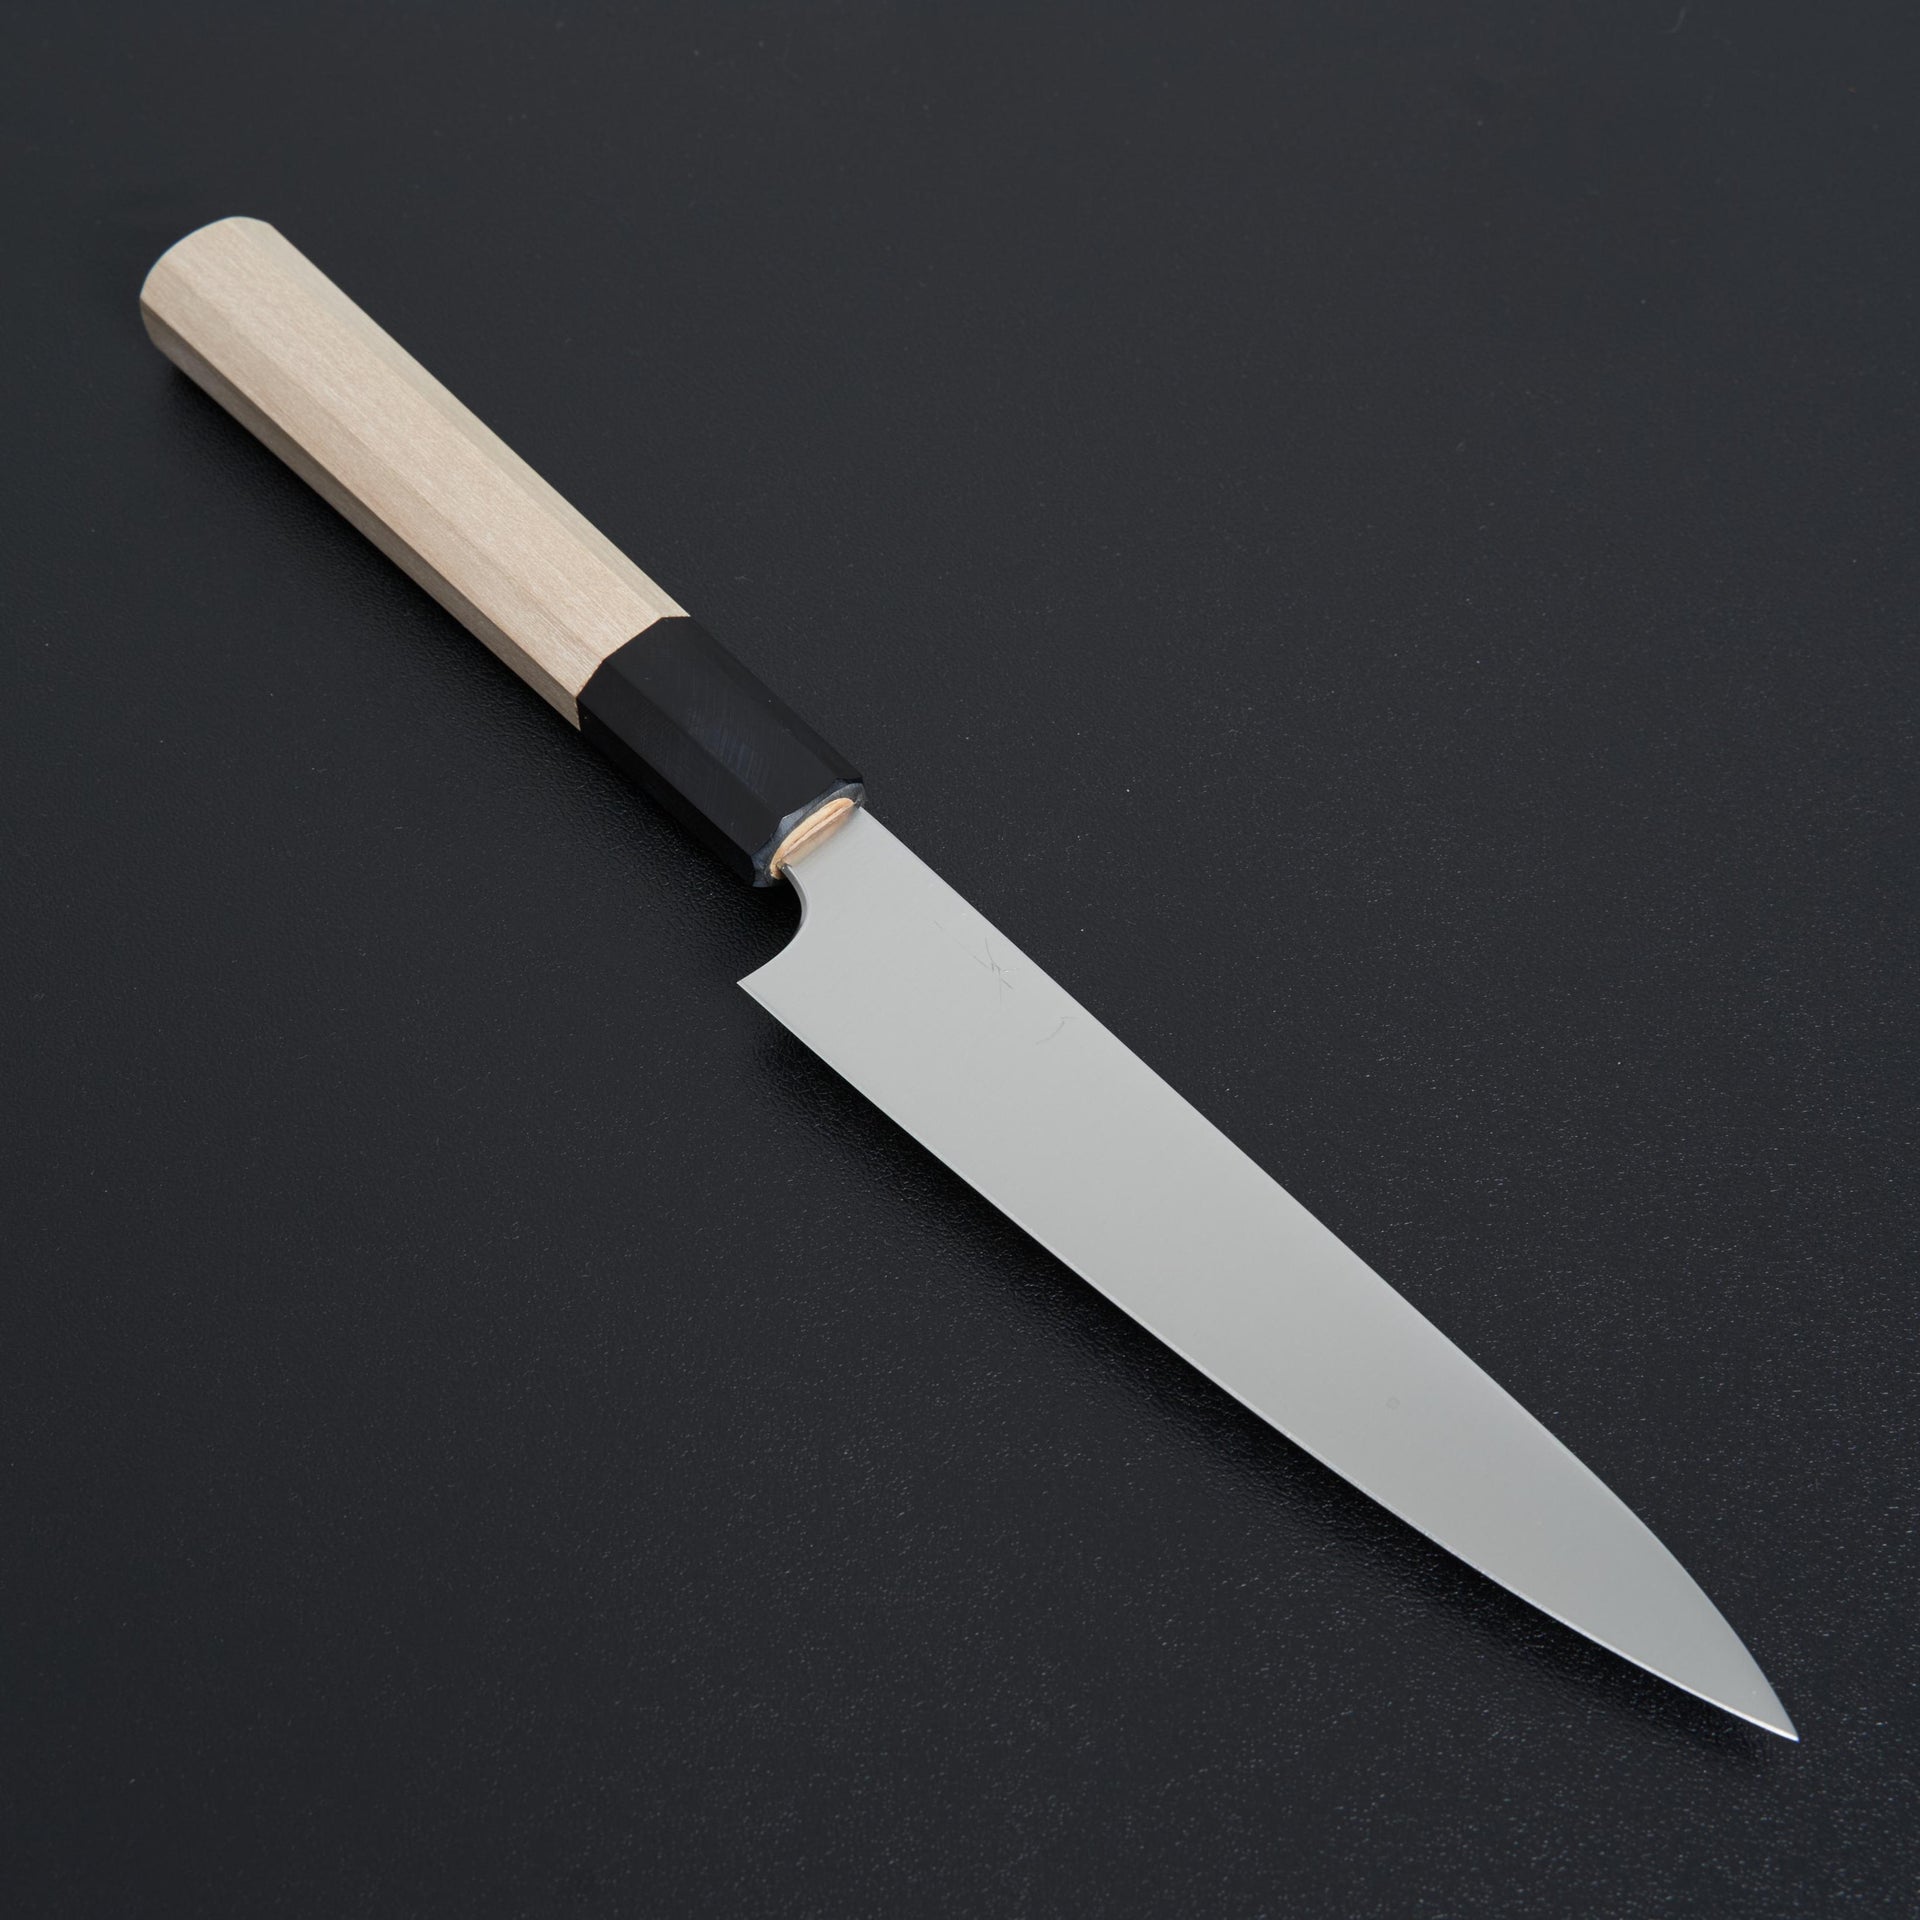 Hitohira SKR Stainless Petty 150mm Ho Wood Handle-Knife-Hitohira-Carbon Knife Co